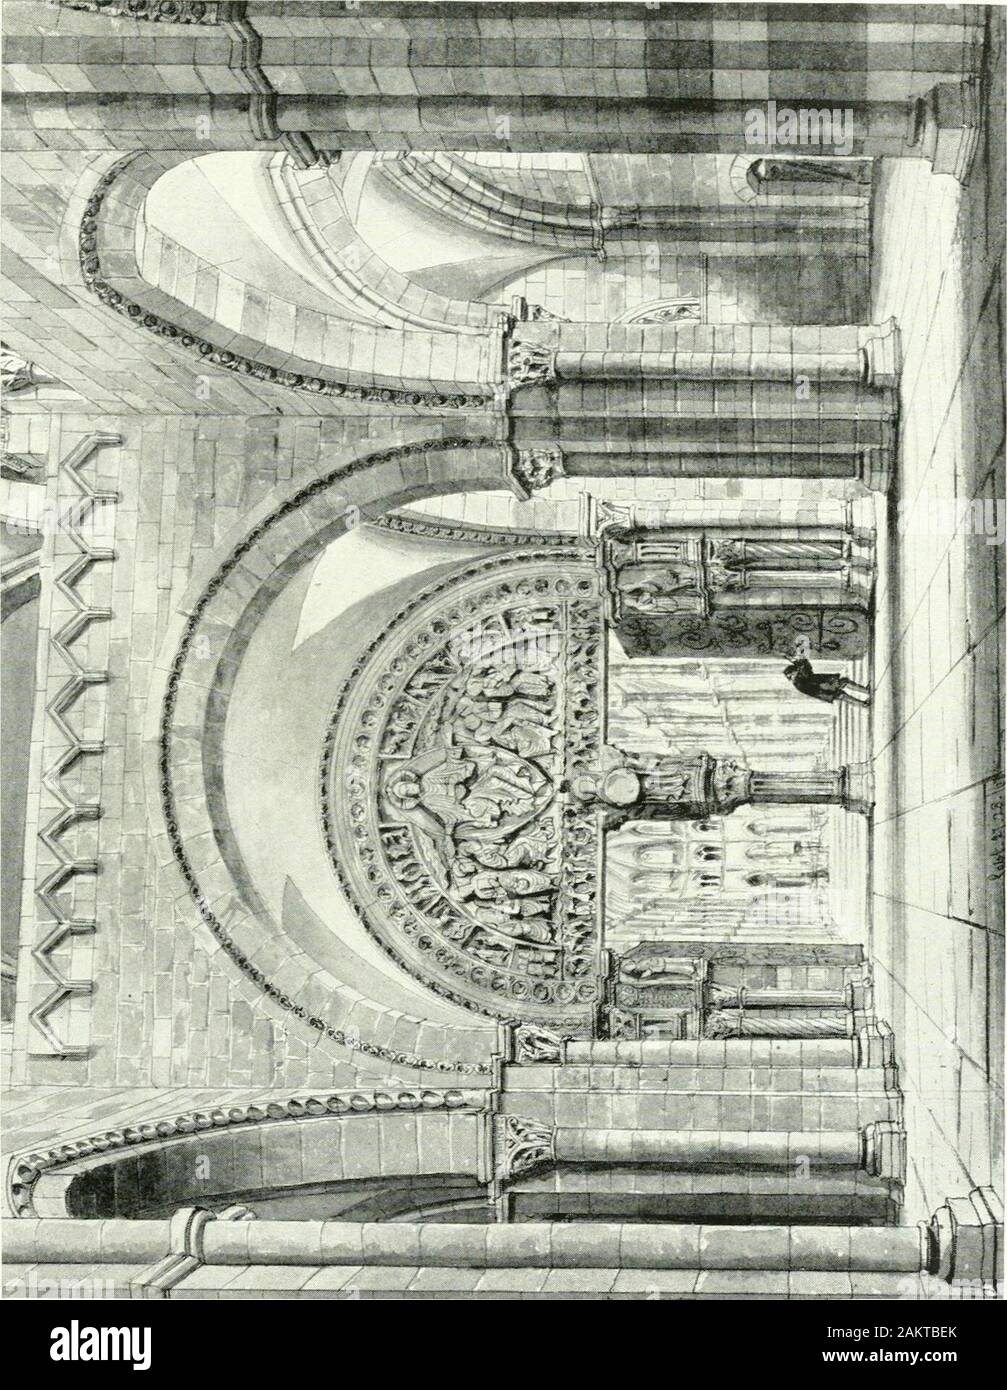 Byzantine and Romanesque architecture . e lowerstorey, while the upper, which is a triforium or gallery,has a ramping vault that gives effectual abutment to thevault of the central nave. In the narthex the pointedarch makes its appearance in the constructive features forthe first time. All the nave arches are round. The nave and aisles are in a sombre round-archedstyle ; and the stringcourses and labels are heavy, anddecorated with rosettes, a favourite Burgundian ornament.The piers are compound, with attached shafts; and thearches, as well as the transverse ribs of the vault arebuilt with alt Stock Photo